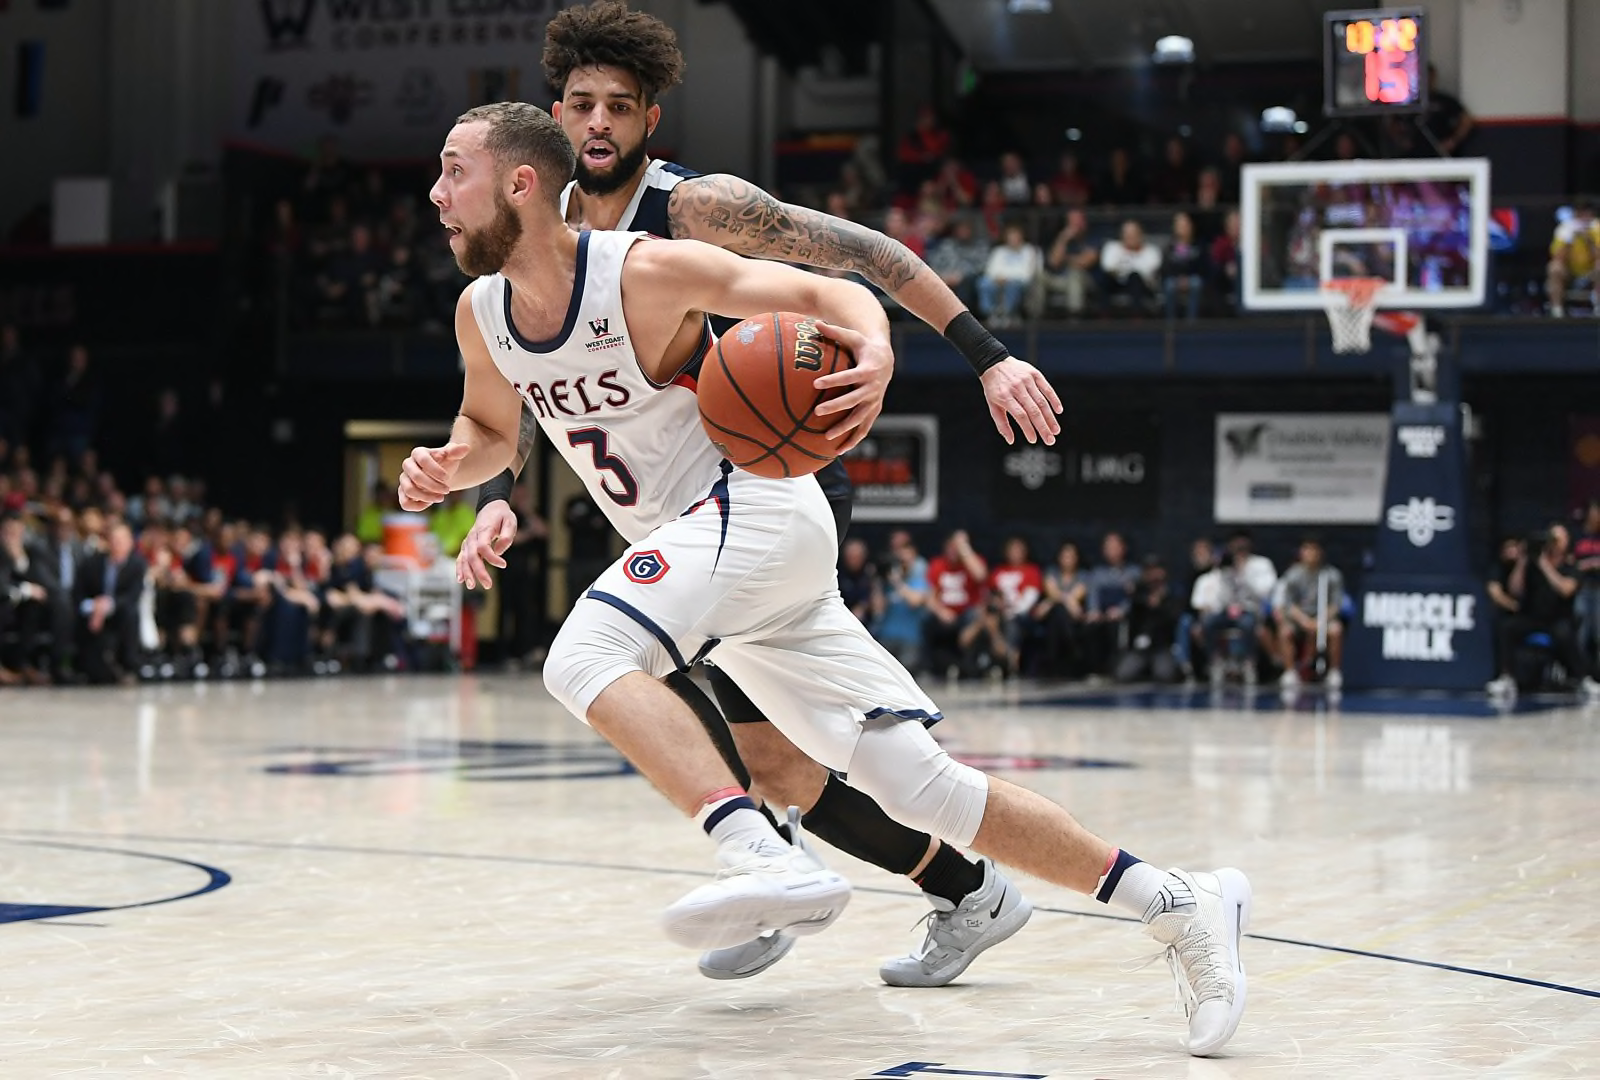 WCC Basketball 5 biggest questions for rest of 201920 season